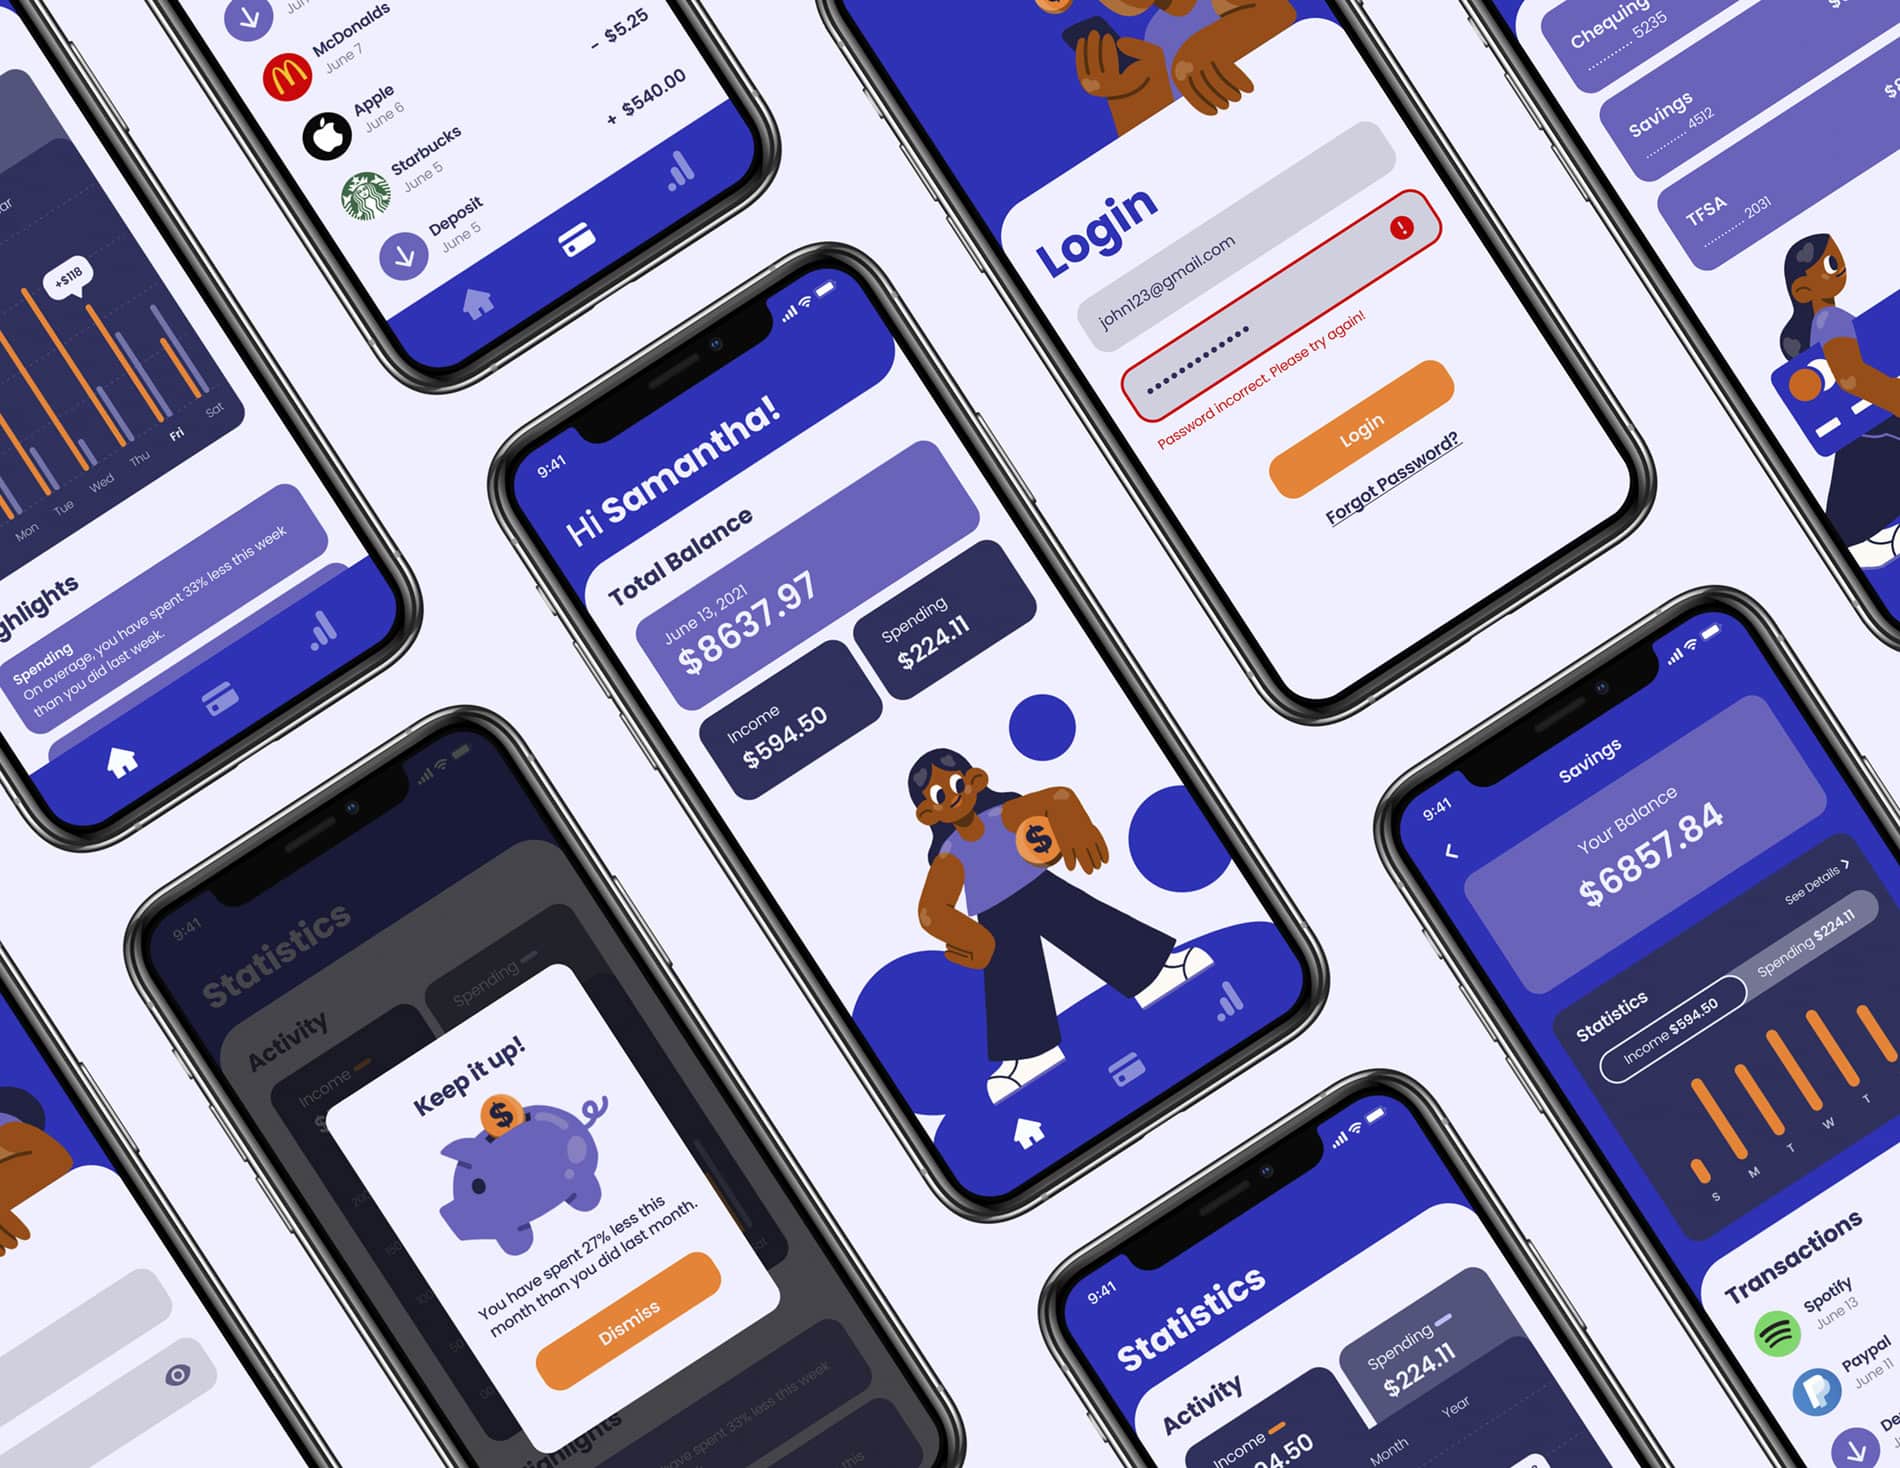 Forwo financial app overview of multiple phone mockup screens in an isometric grid